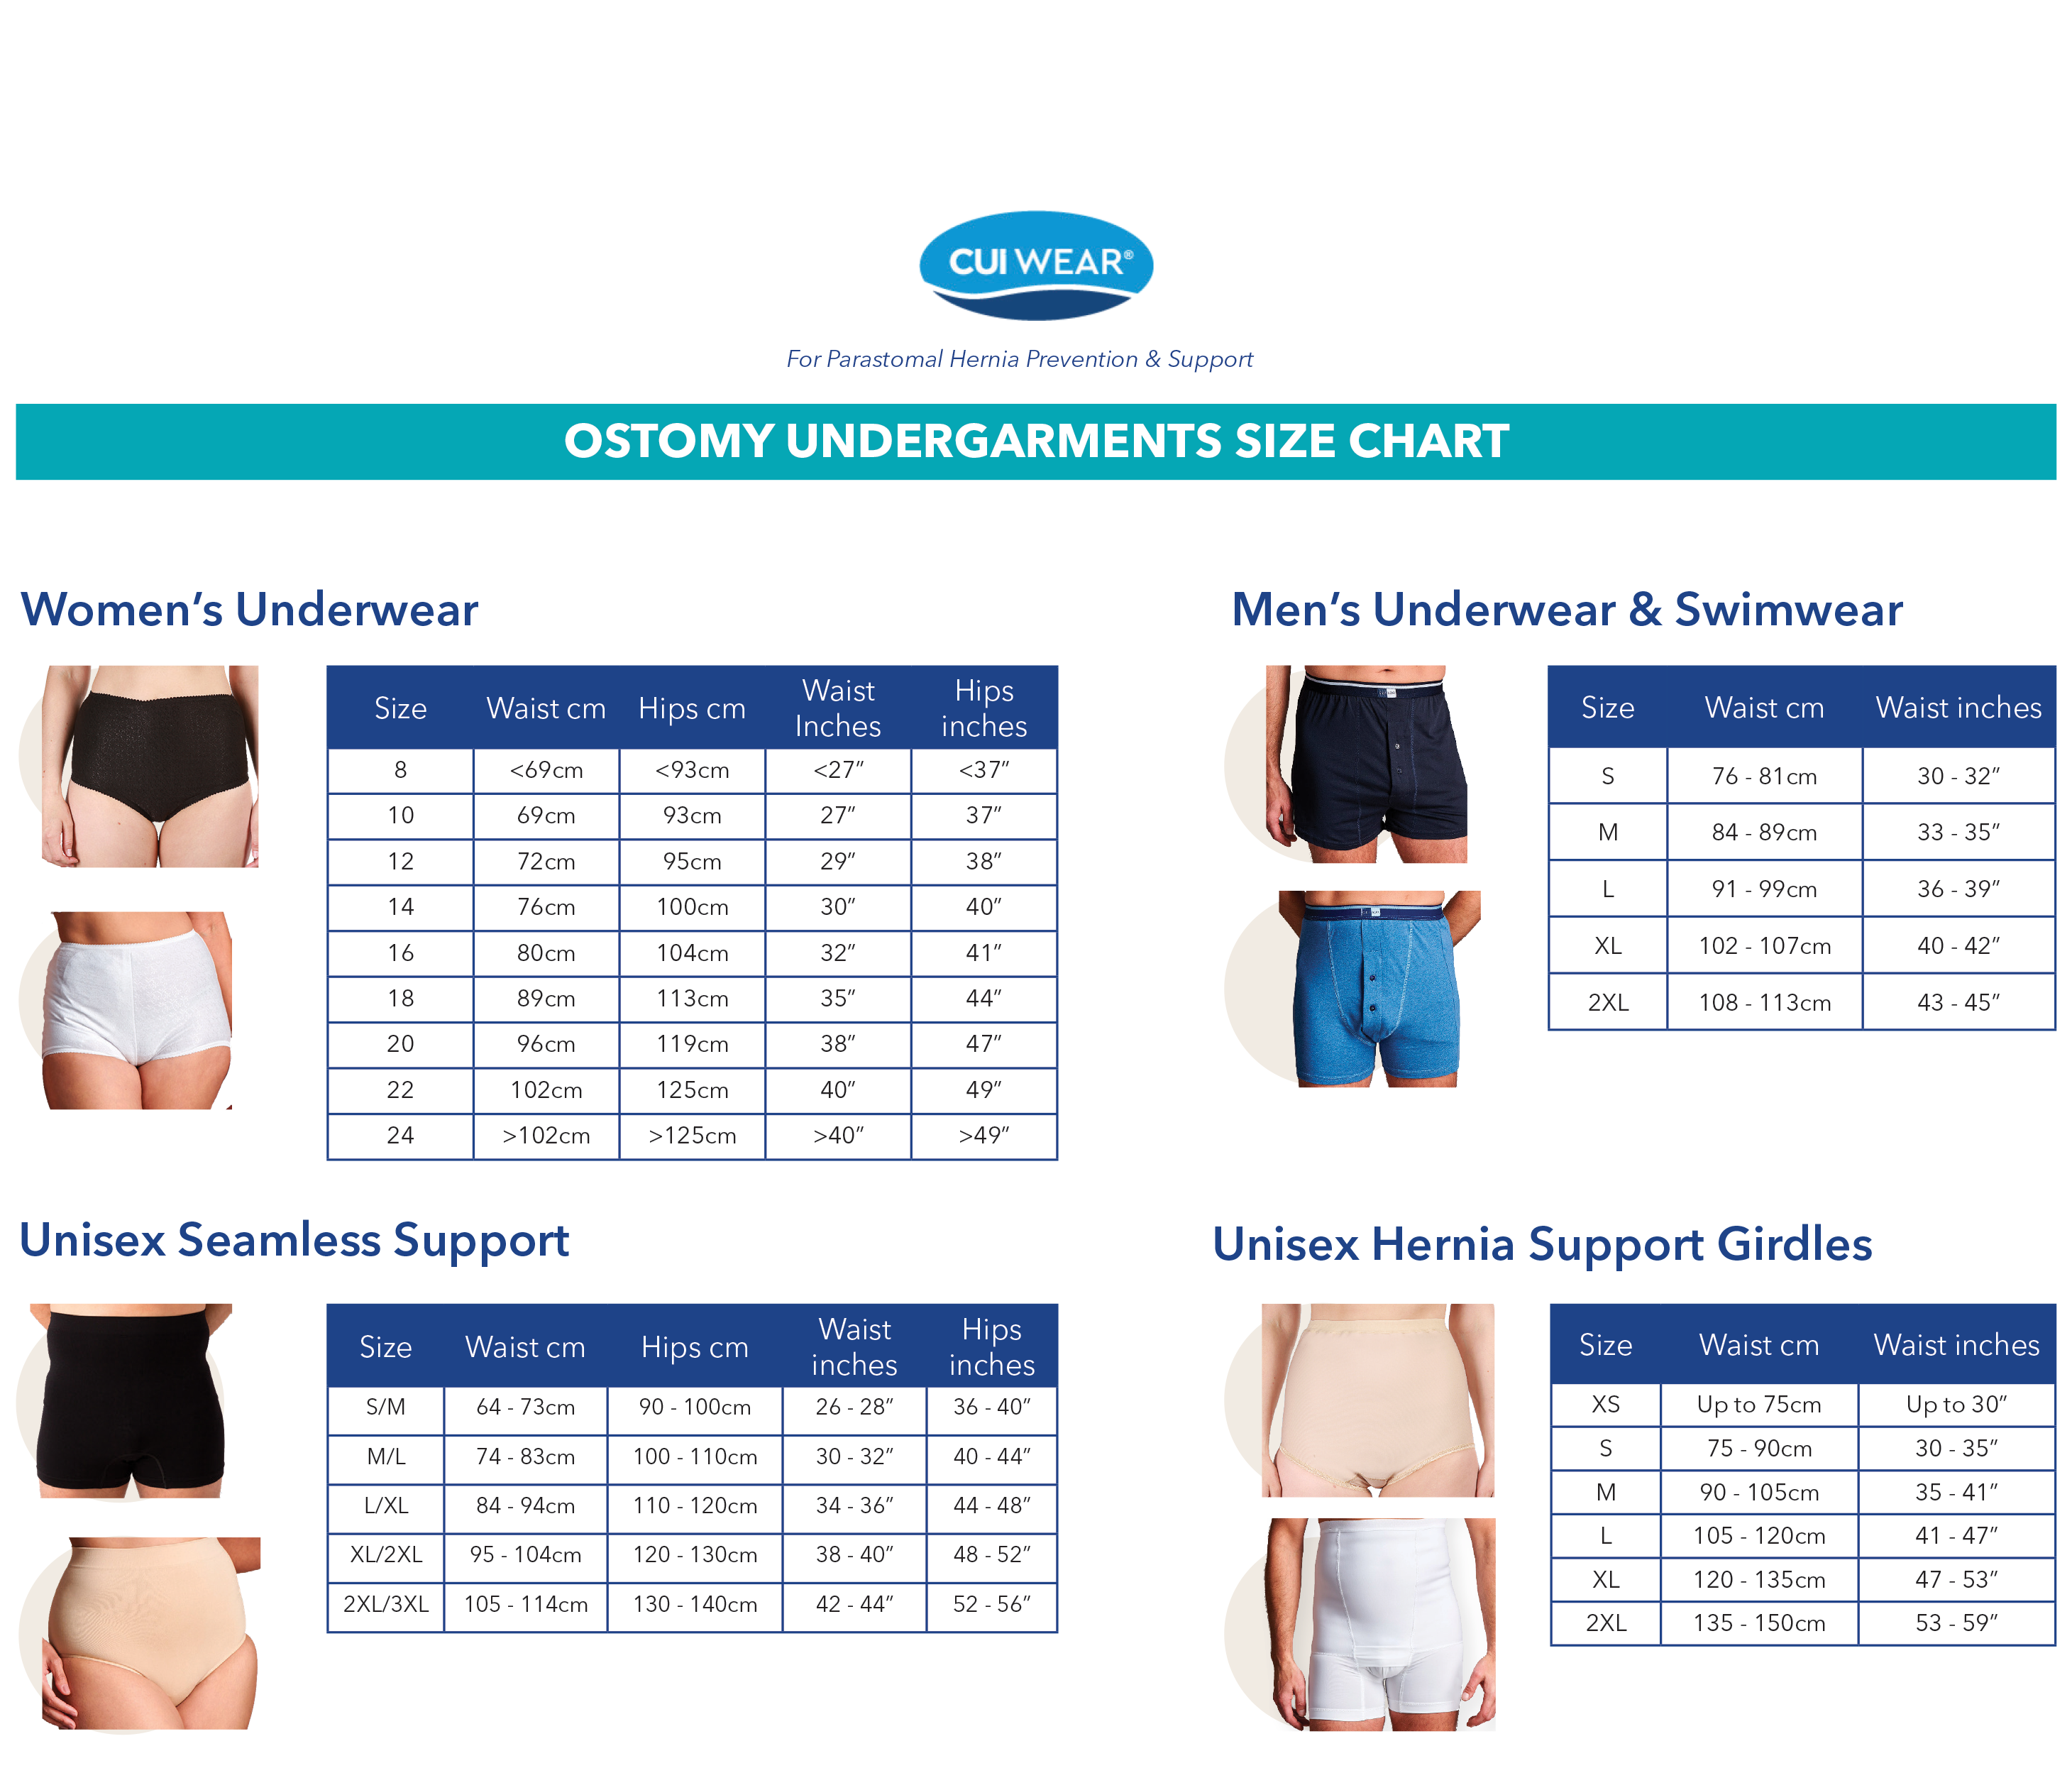 CUI Mens Hernia Low Waist Support Girdle With Legs - 1 each, LARGE, BLACK-2